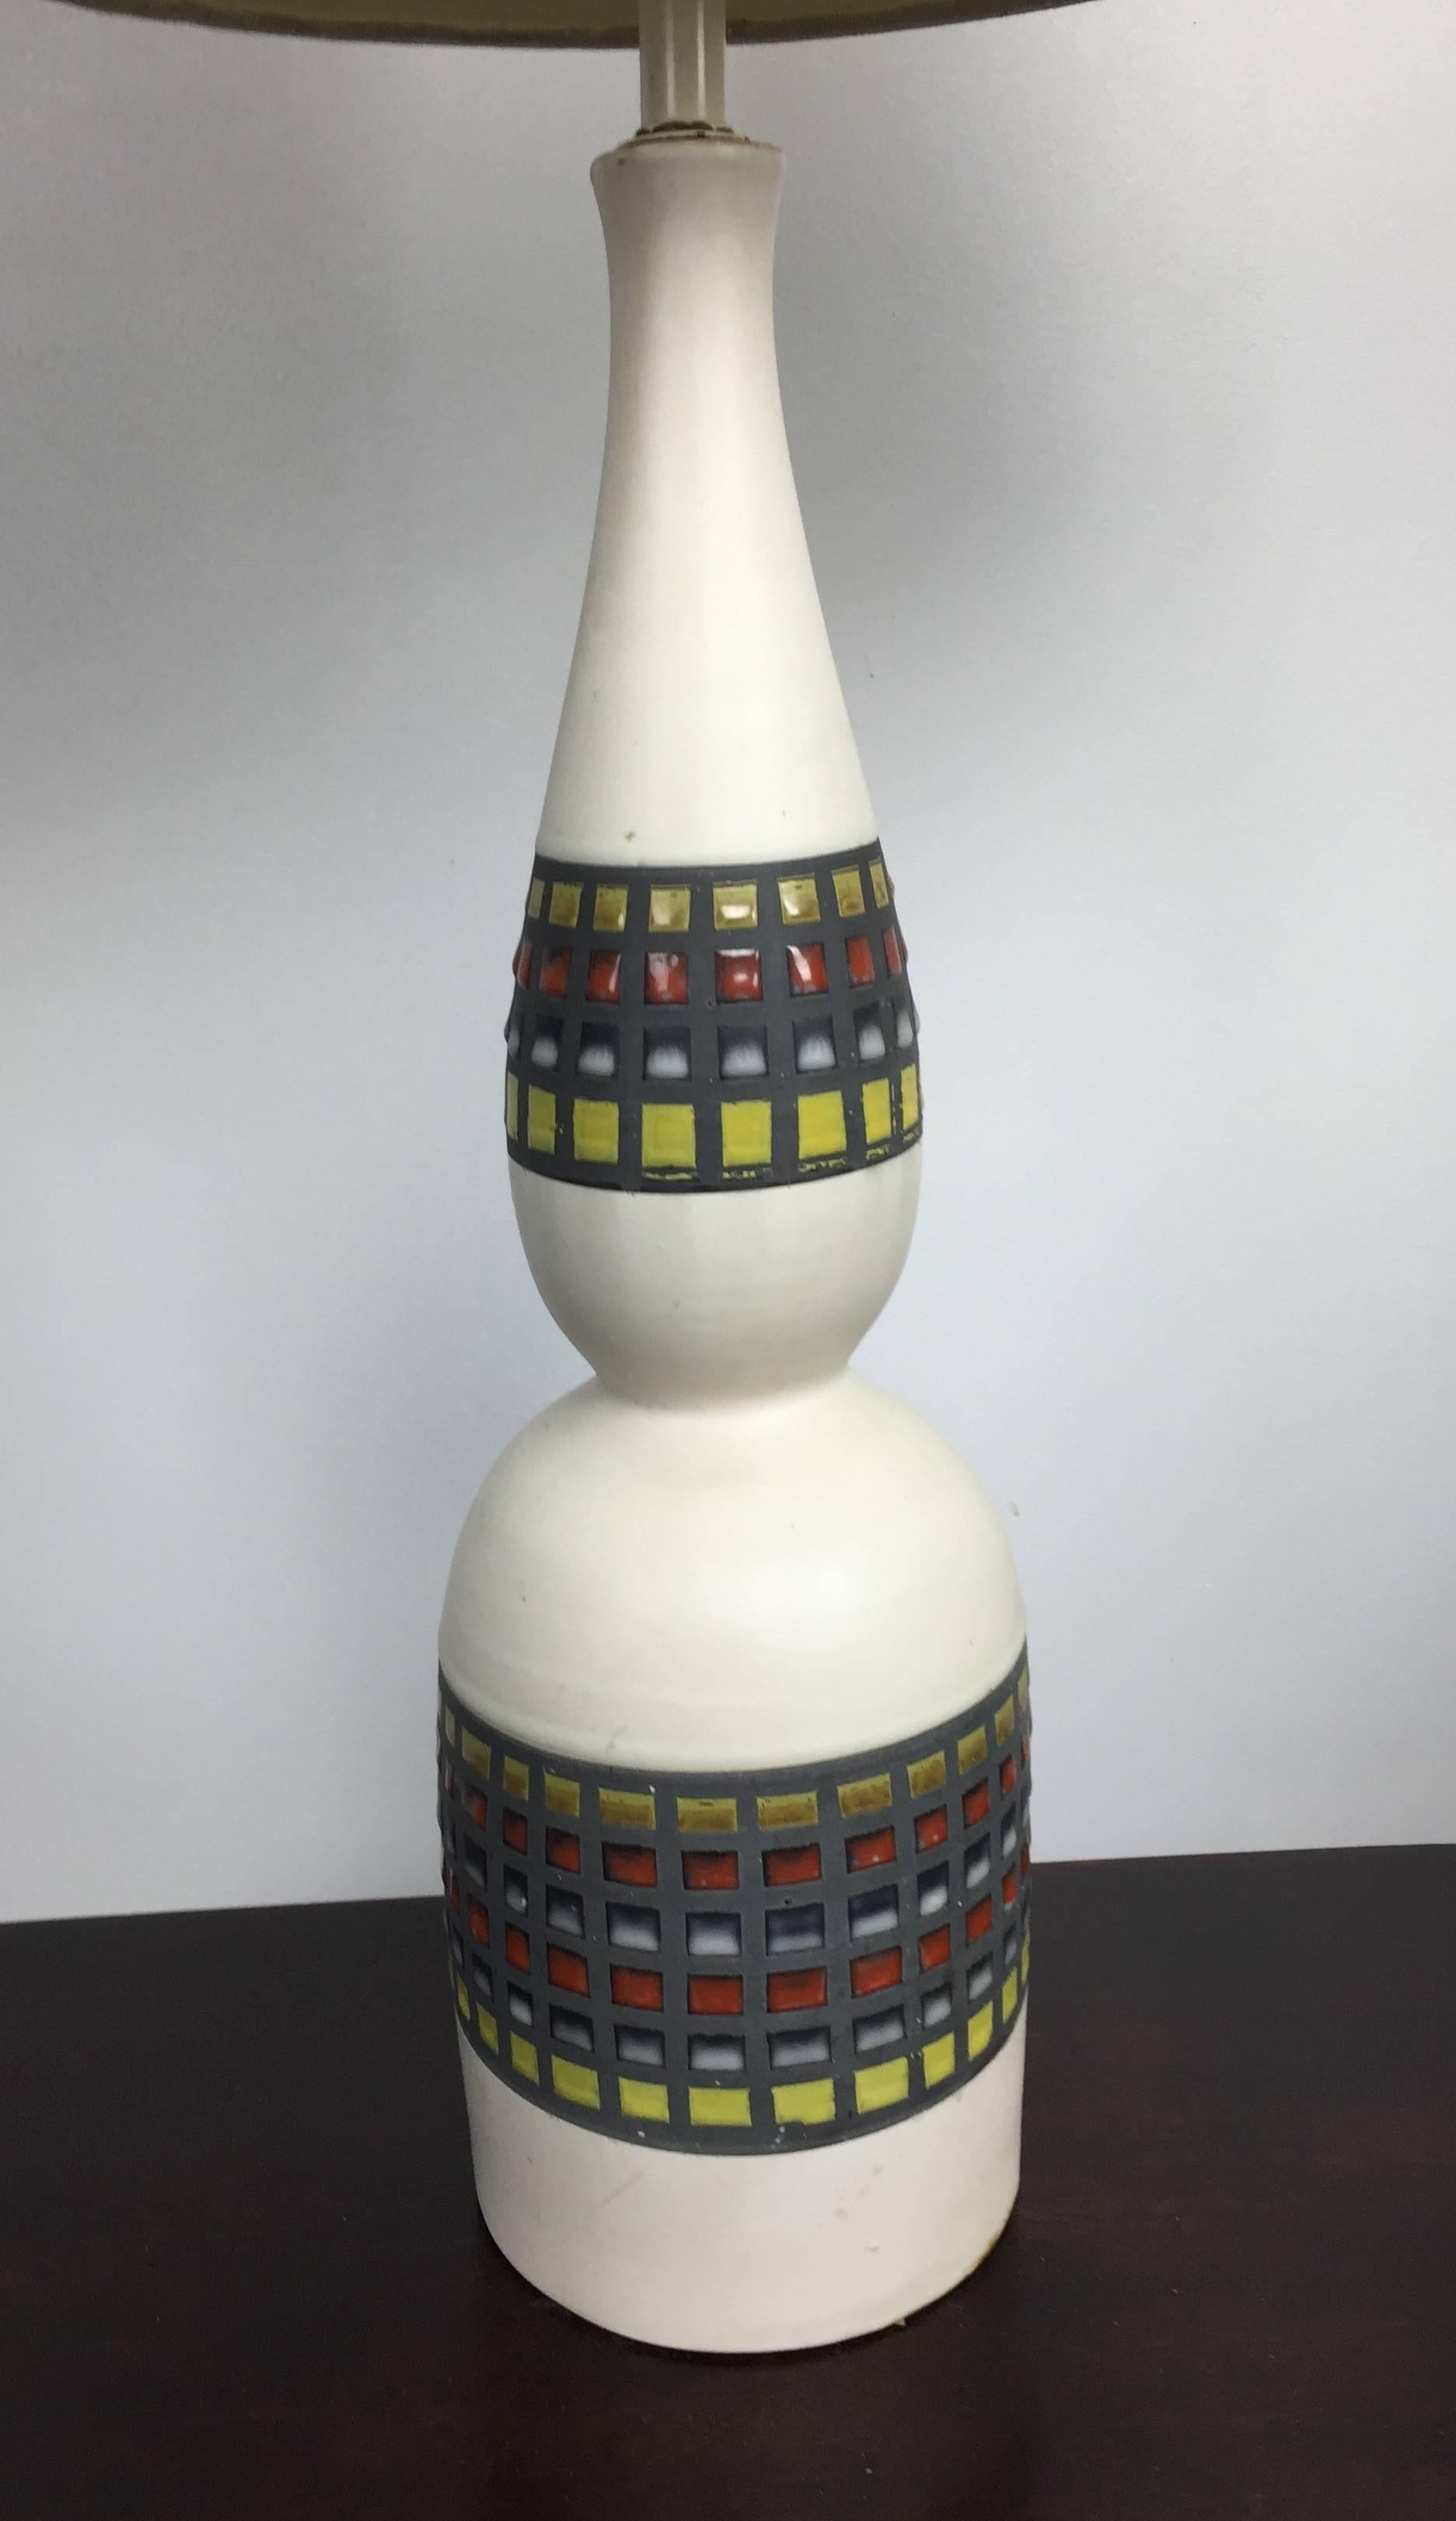 A beautiful pair of 1950s ceramic table lamps produced in Italy by The Bitossi firm. The glaze pattern evokes a Mosaic over a matte white pinched bottle base.